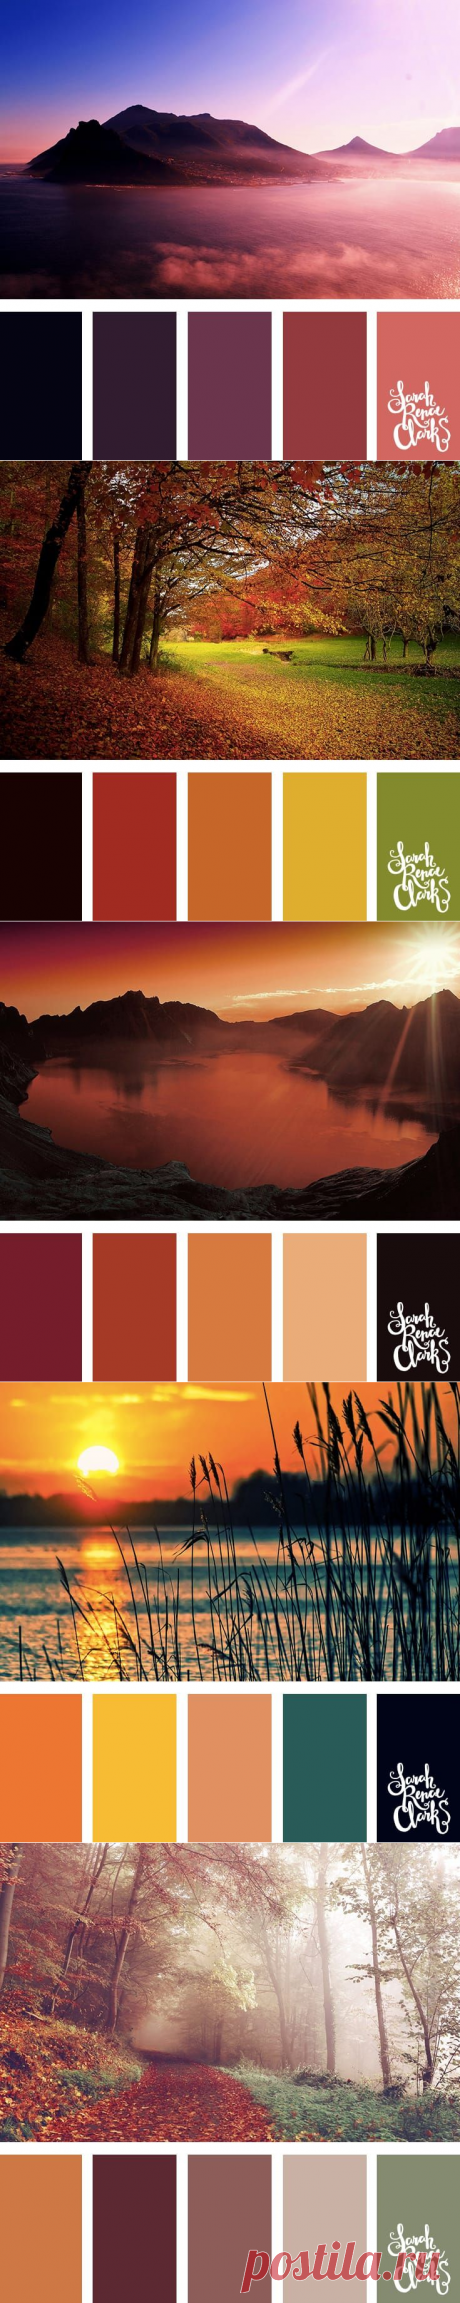 25 Color Palettes Inspired by Beautiful Landscapes | Inspiring color schemes by Sarah Renae Clark